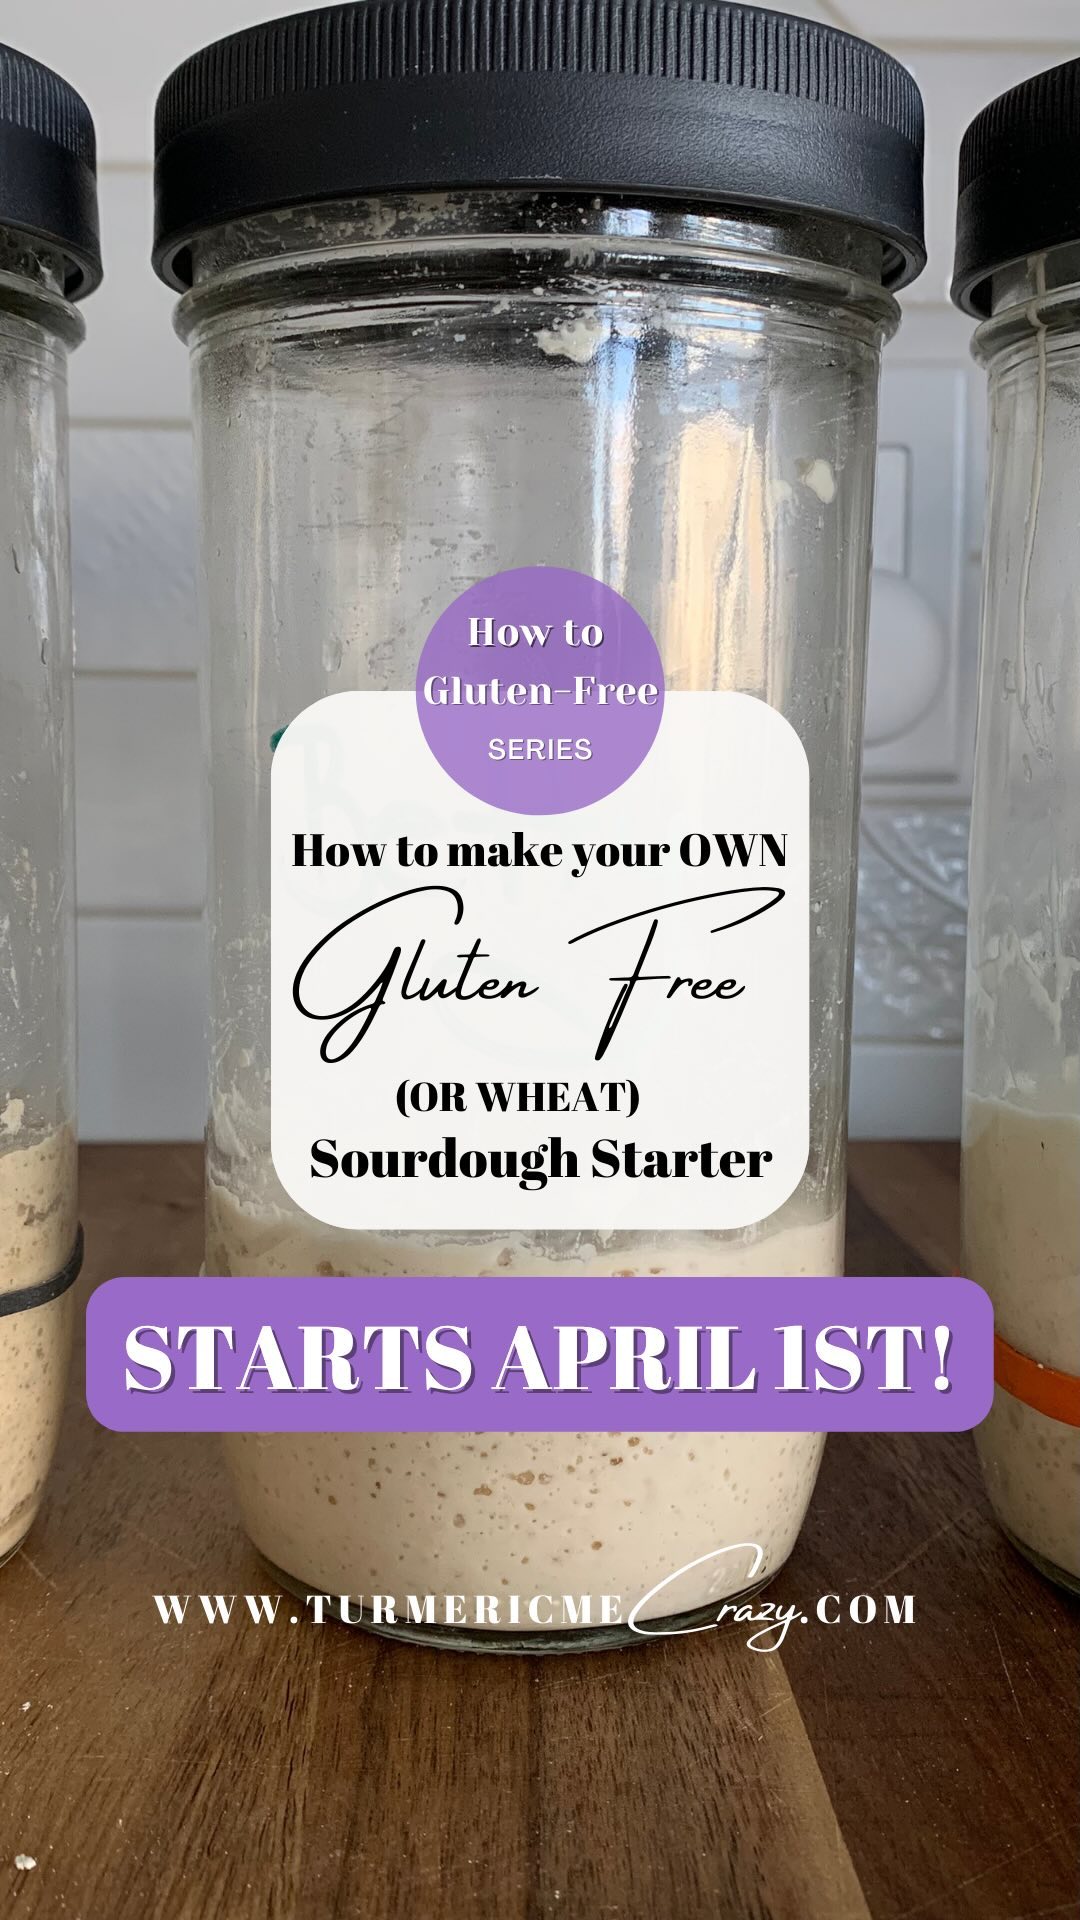 We start making our sourdough starters TOMORROW, APRIL 1st, and I’m not fooling! 

Check out the full PRINTABLE MATERIALS LIST & instructional video now live on my blog! Link in my bio or 👇🏻

⭐️https://turmericmecrazy.com/how-to-make-a-sourdough-starter-gluten-free-or-wheat⭐️

So, go gather all of your materials and I’ll meet you on my blog on the morning of April 1st! 

🥺Does the idea of making your own Sourdough Starter overwhelm you?

😩Are you Gluten-Free and miss baking Sourdough Bread?

🤩Did you know you can make a gluten free sourdough starter?

💪🏻Knowledge is POWER! Let’s take the mystery out of baking sourdough whether is gluten free or not!

I'm SO excited to start the newest addition to my How to Gluten-Free Series: How to make a Sourdough Starter - (Gluten Free & Regular) it is going to be SO awesome!

In this series I hope to impart the knowledge necessary to give you all the tools you’ll ever need to make incredible sourdough intuitively! Whether your gluten-free or not! I’ll have DAILY follow-along videos & 1 minute quickie videos with all the details!

In this materials list video, I’ll share with all of the necessary ingredients and materials that you’re going to need starting April 1, 2022.

Each day during this series I will share with you my knowledge and experience with creating and maintaining both gluten-free and regular sourdough starters. Then we’ll create a leaven & bake some sourdough! I hope to help you gain the knowledge and understanding to make your sourdough making process easy and fun!

#glutenfreesourdough #gfsourdoughseries #sourdough #sourdoughstarters #glutenfreesourdoughstarters #glutenfreesourdoughstarter #glutenfreesourdoughcreation #howtomakeaglutenfreestarter #glutenfreesourdoughsuccess #glutenfreesourdoughseries #howtoglutenfreeseries #glutenfreesourdoughstarterinstructions #glutenfreesourdoughcourse #glutenfreesourdoughrecipe #sourdoughclub #sourdoughschool #glutenfreesourdoughschool #glutenfreesourdoughstartermadeeasy #understandingsourdough, #understandingglutenfreecooking #turmeric_me_crazy #fermentedfood #understandingglutenfreesourdough, #gfsourdoughstarter #gfsourdoughstarter